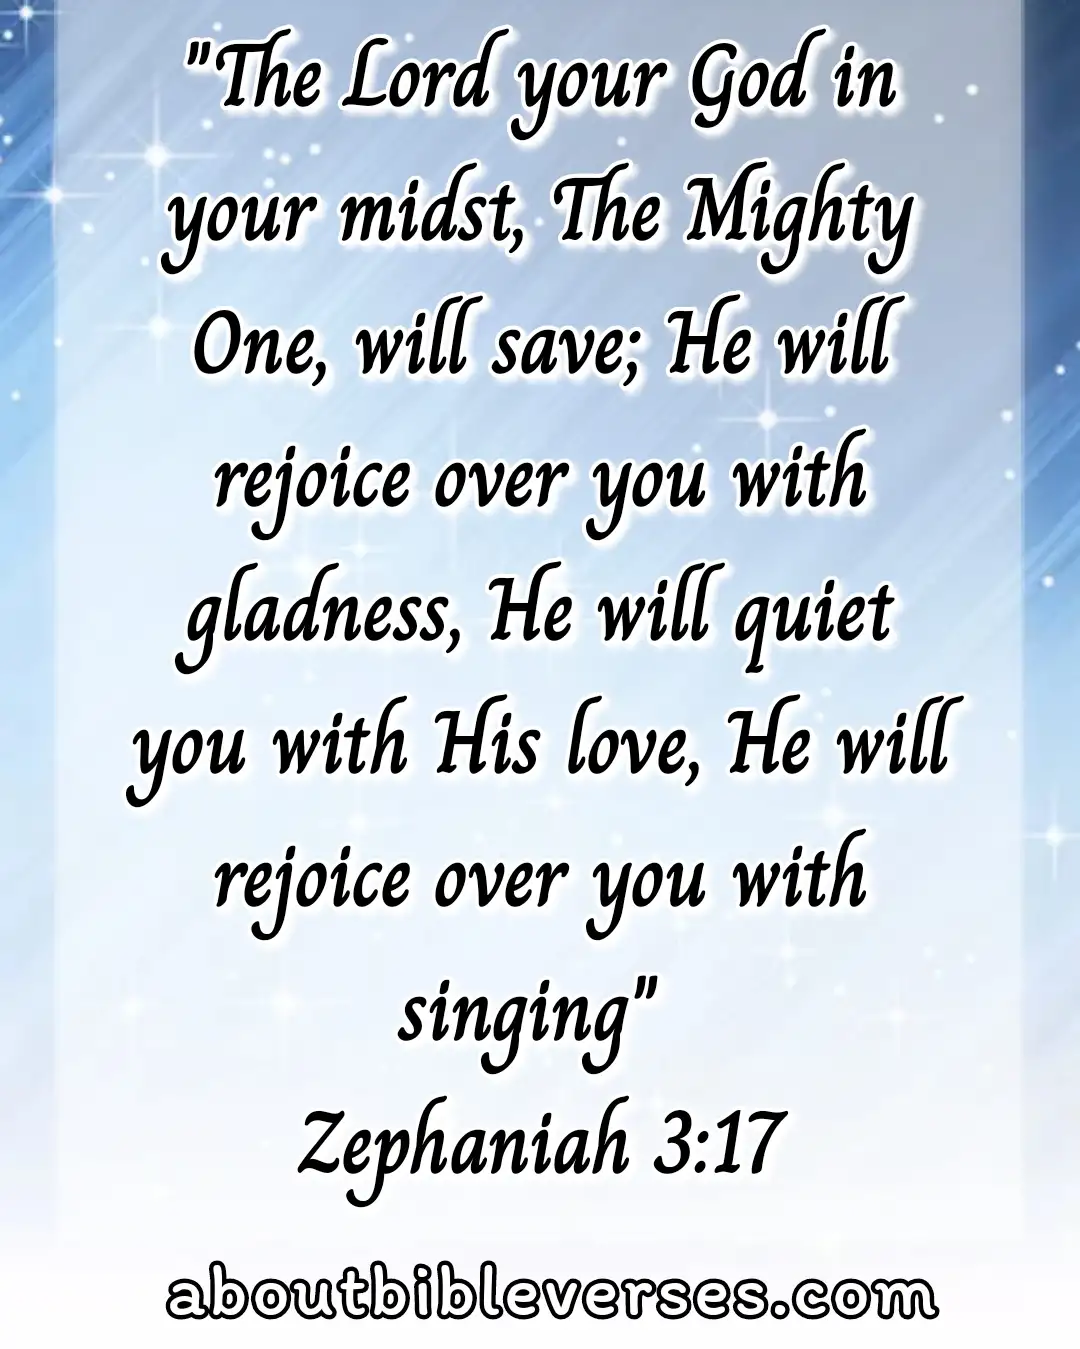 Bible Verses About Being Happy In Hard Times (Zephaniah 3:17)